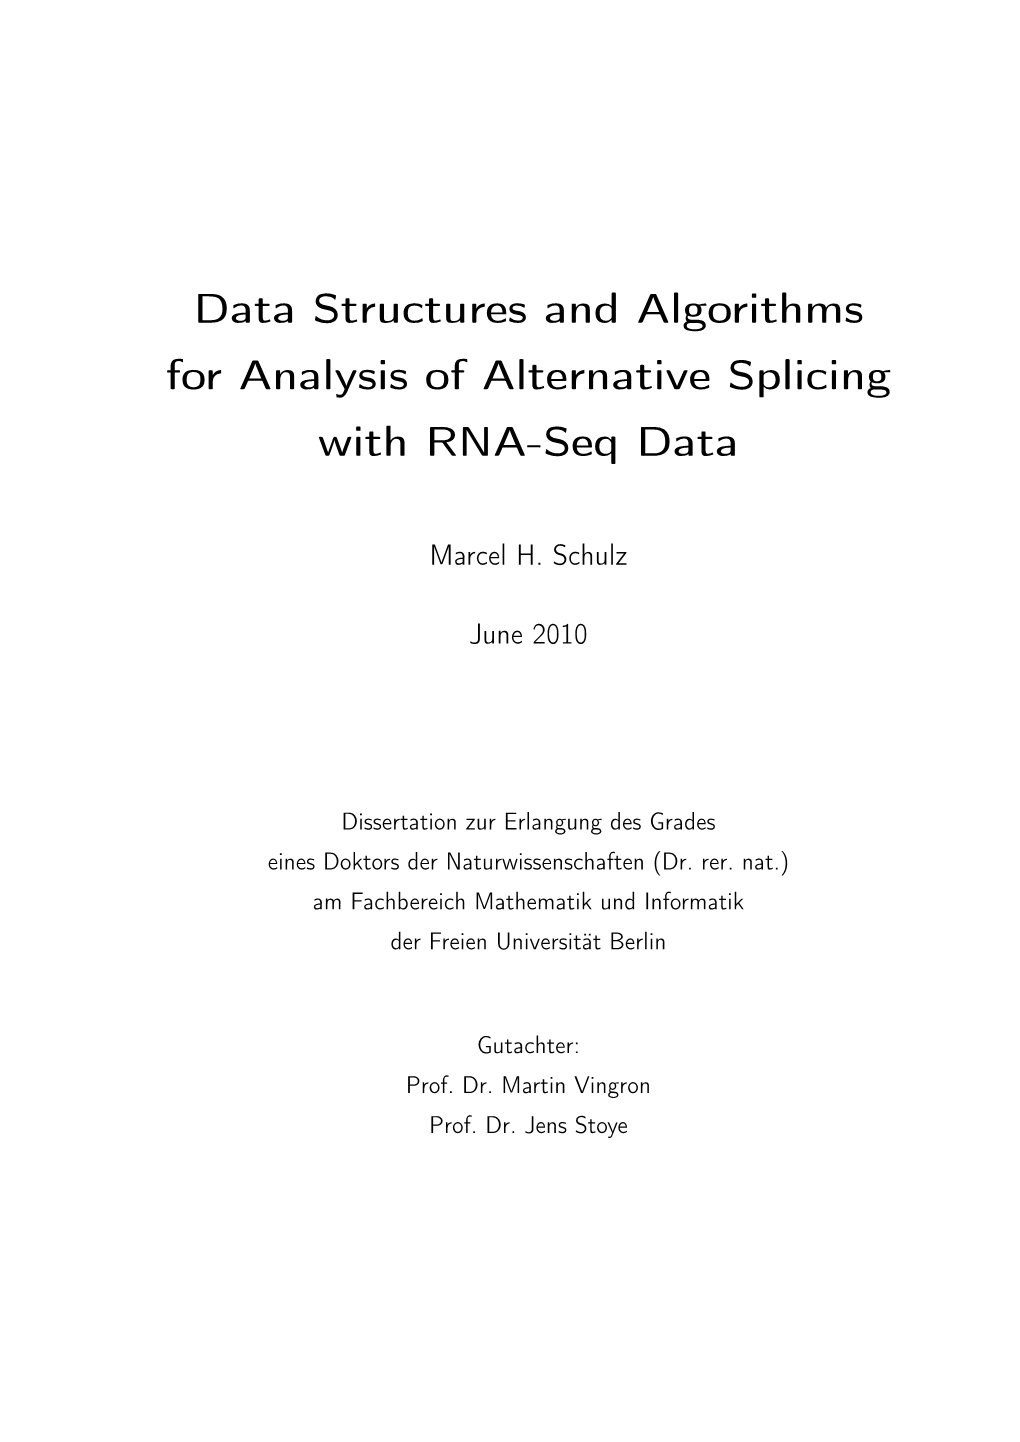 Data Structures and Algorithms for Analysis of Alternative Splicing with RNA-Seq Data